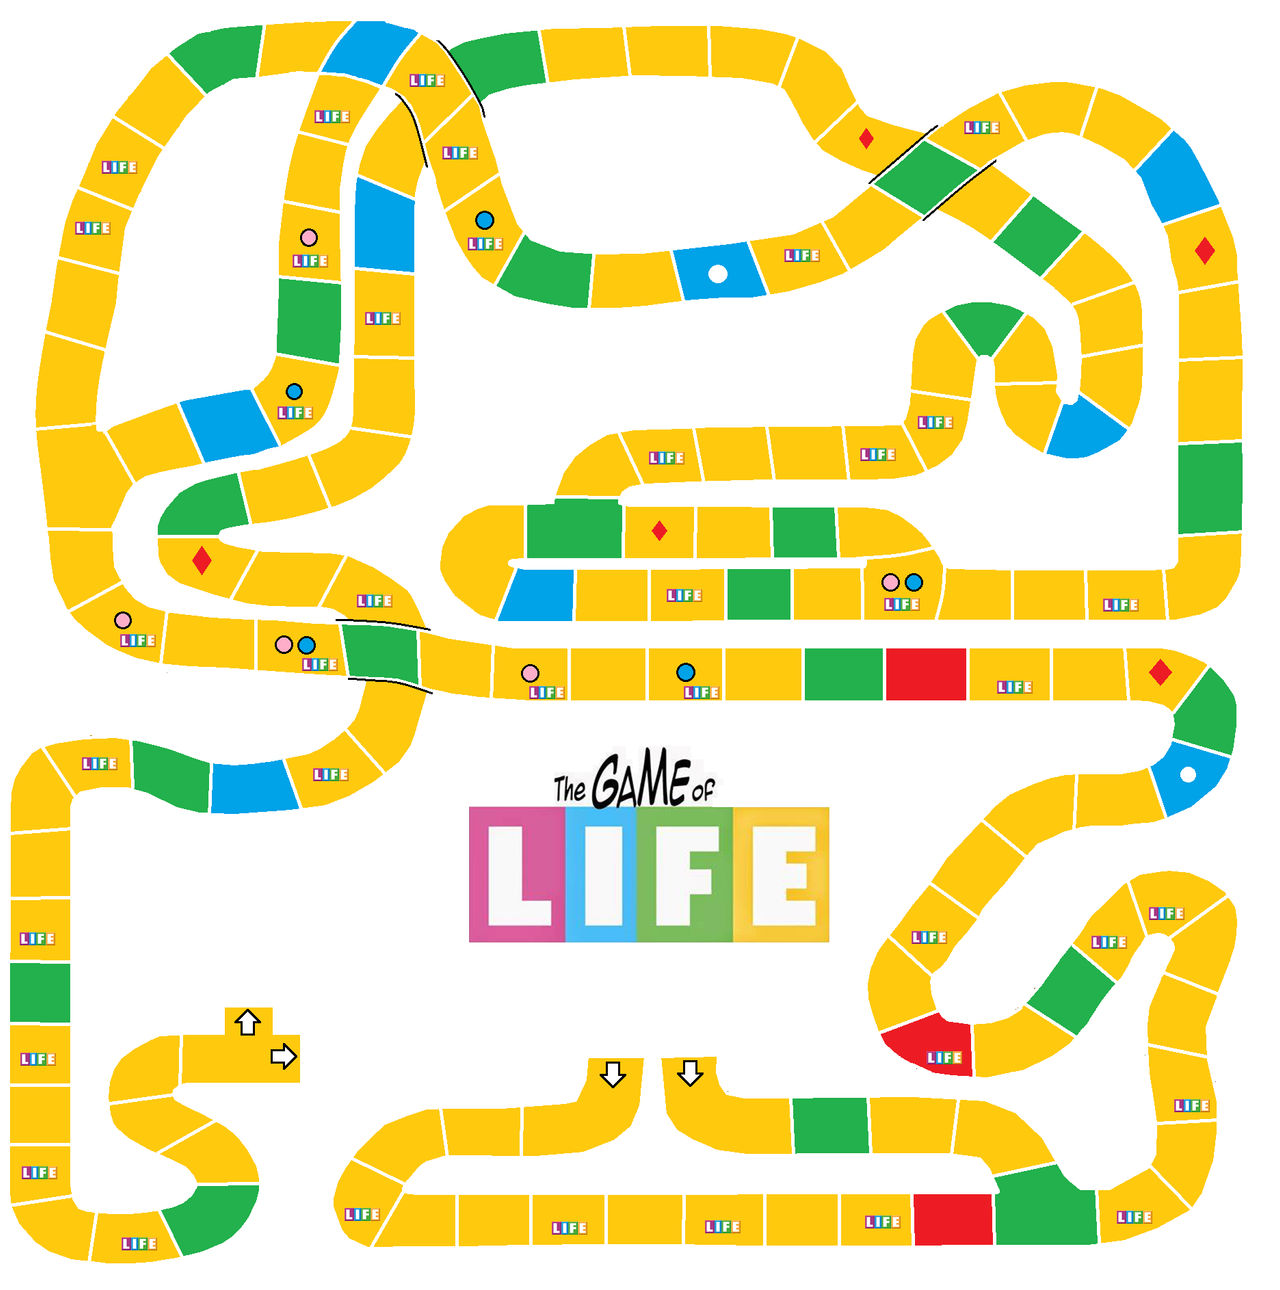 Life: The Game 